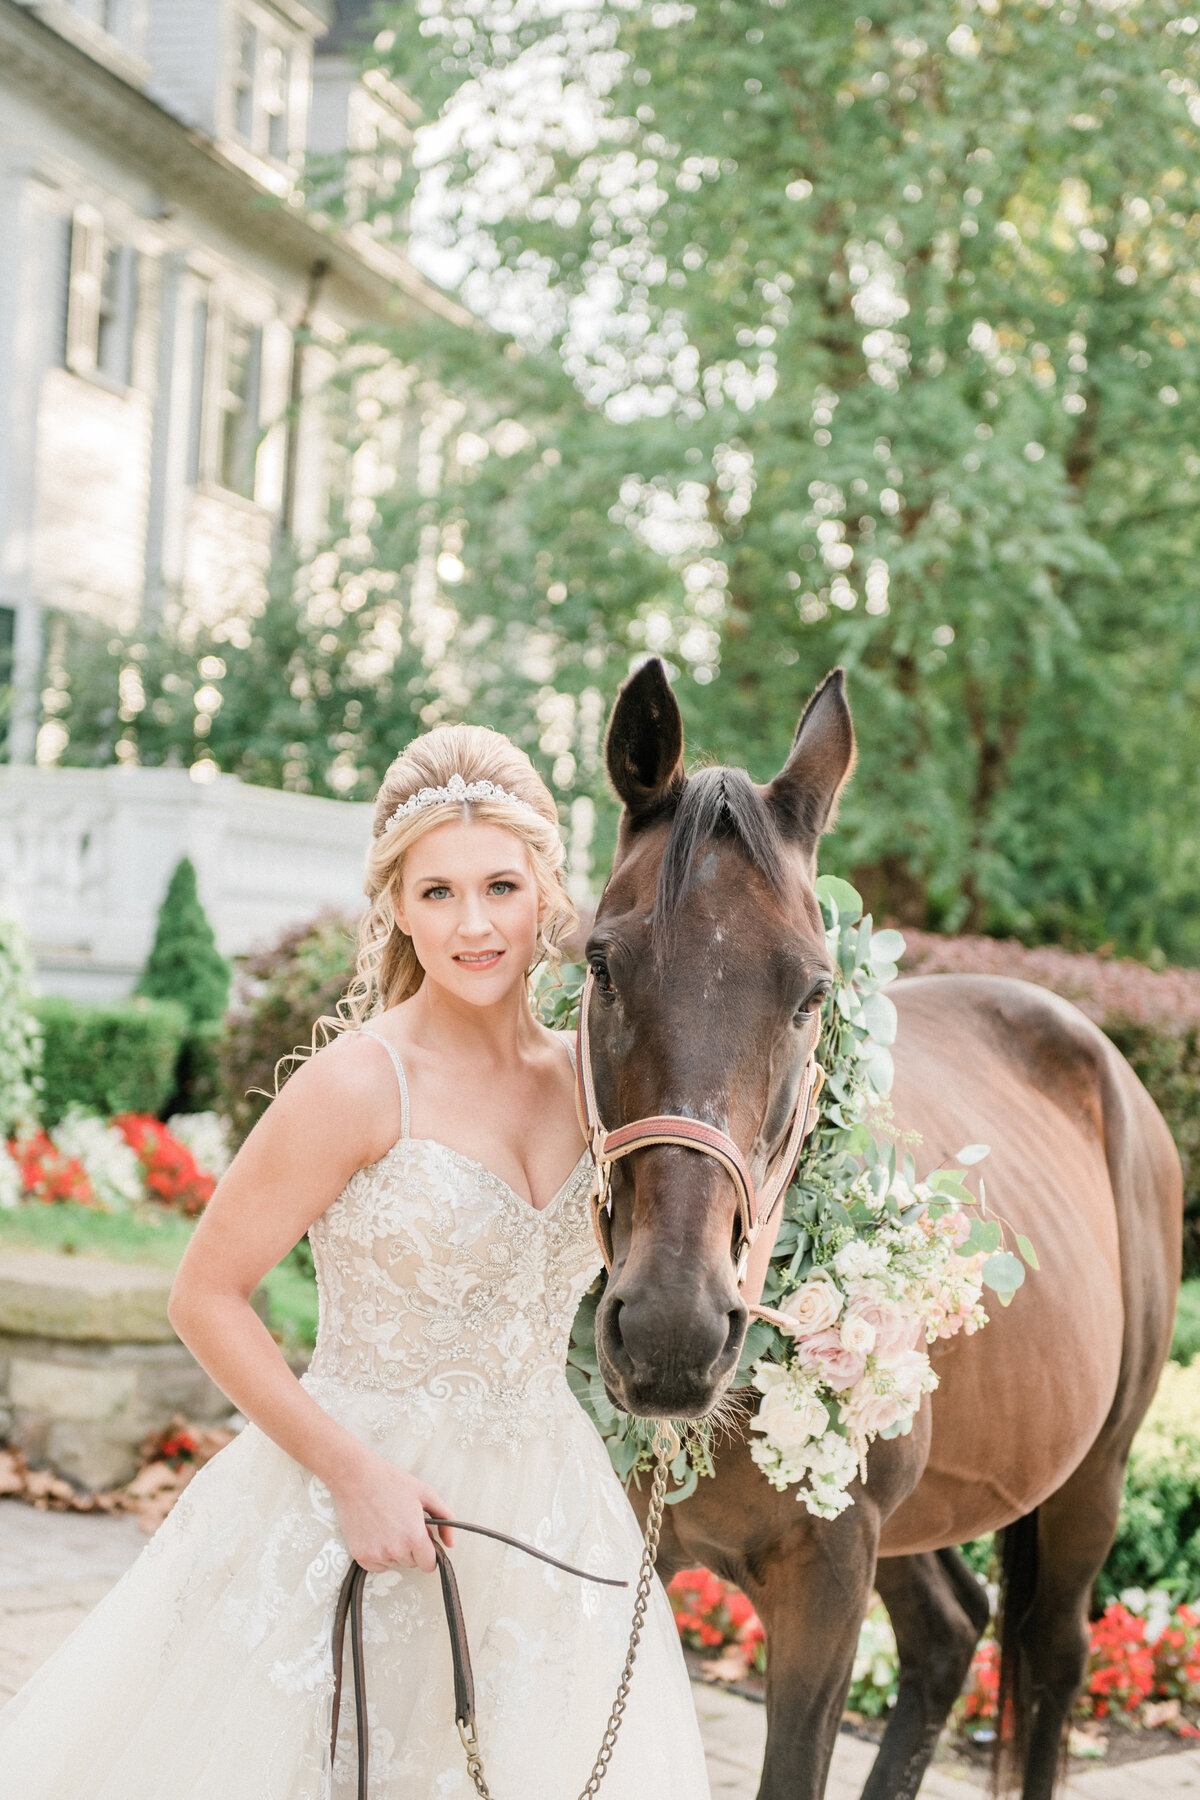 Beautiful bride at her columbus wedding planned by sirpilla soirees